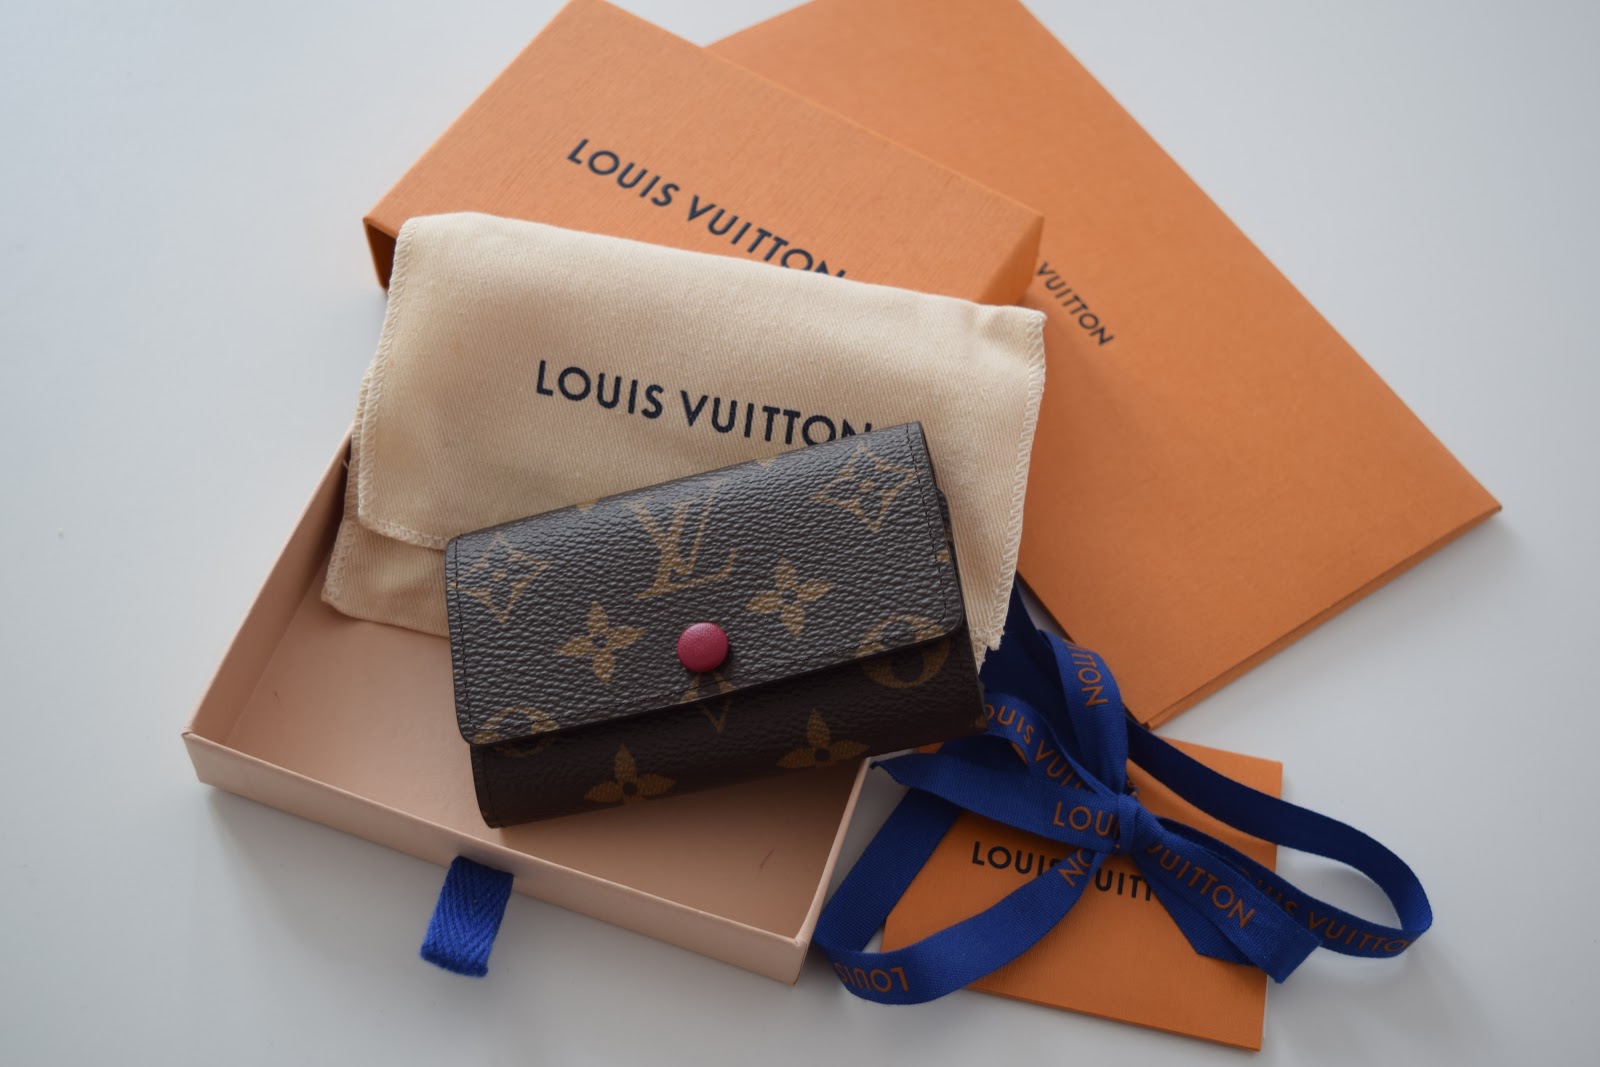 My first Louis Vuitton - The Stylish Gimp